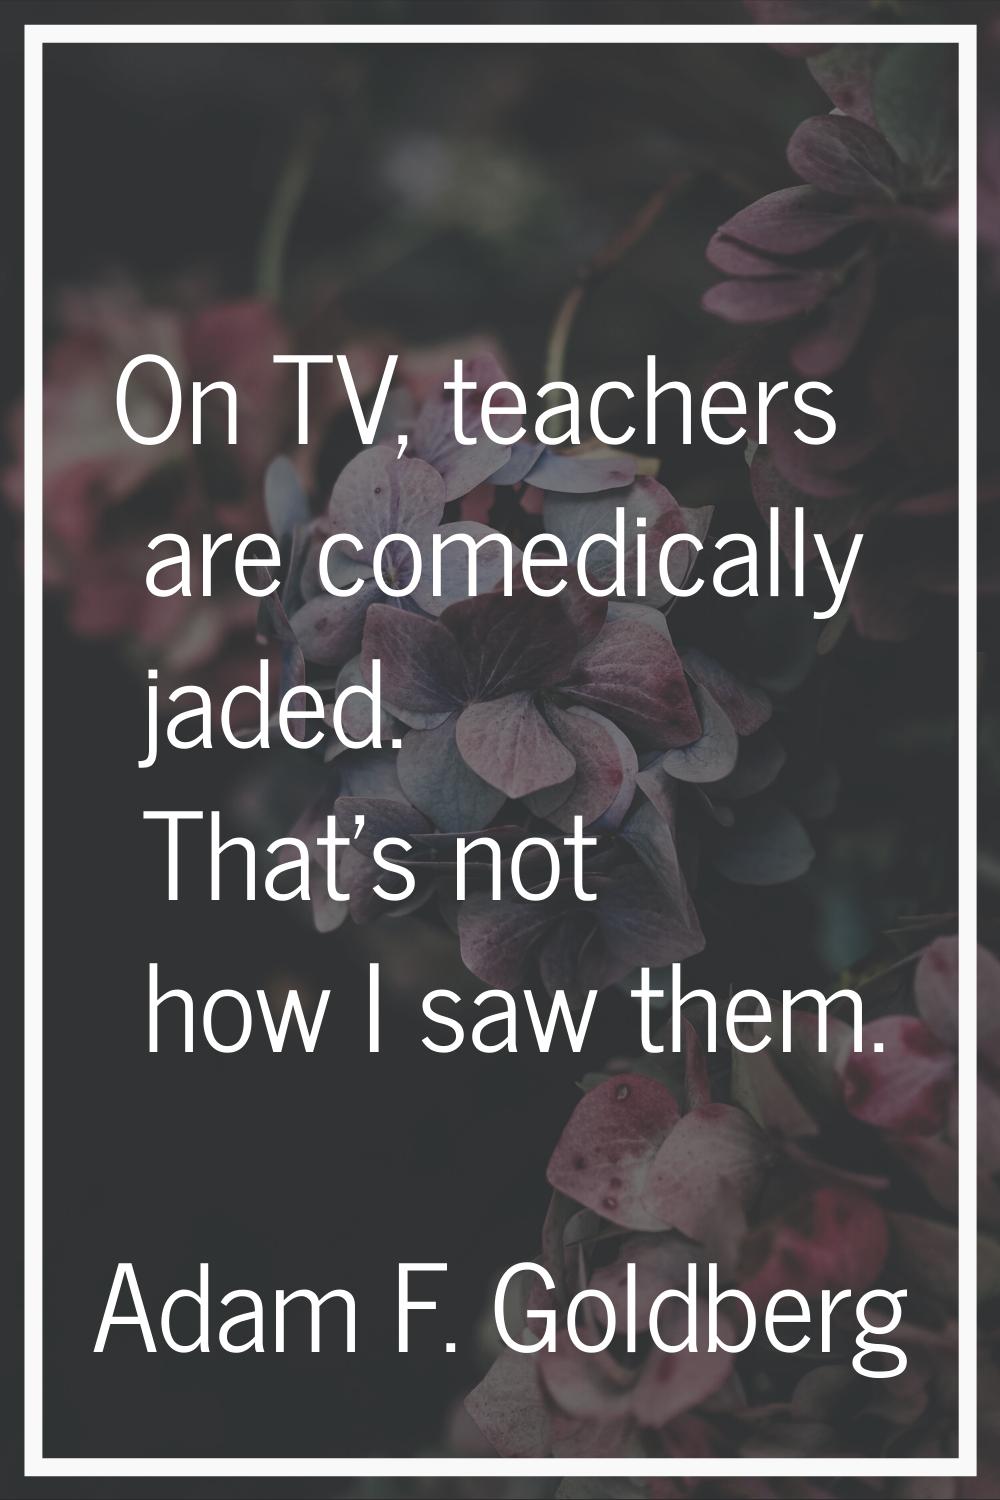 On TV, teachers are comedically jaded. That's not how I saw them.